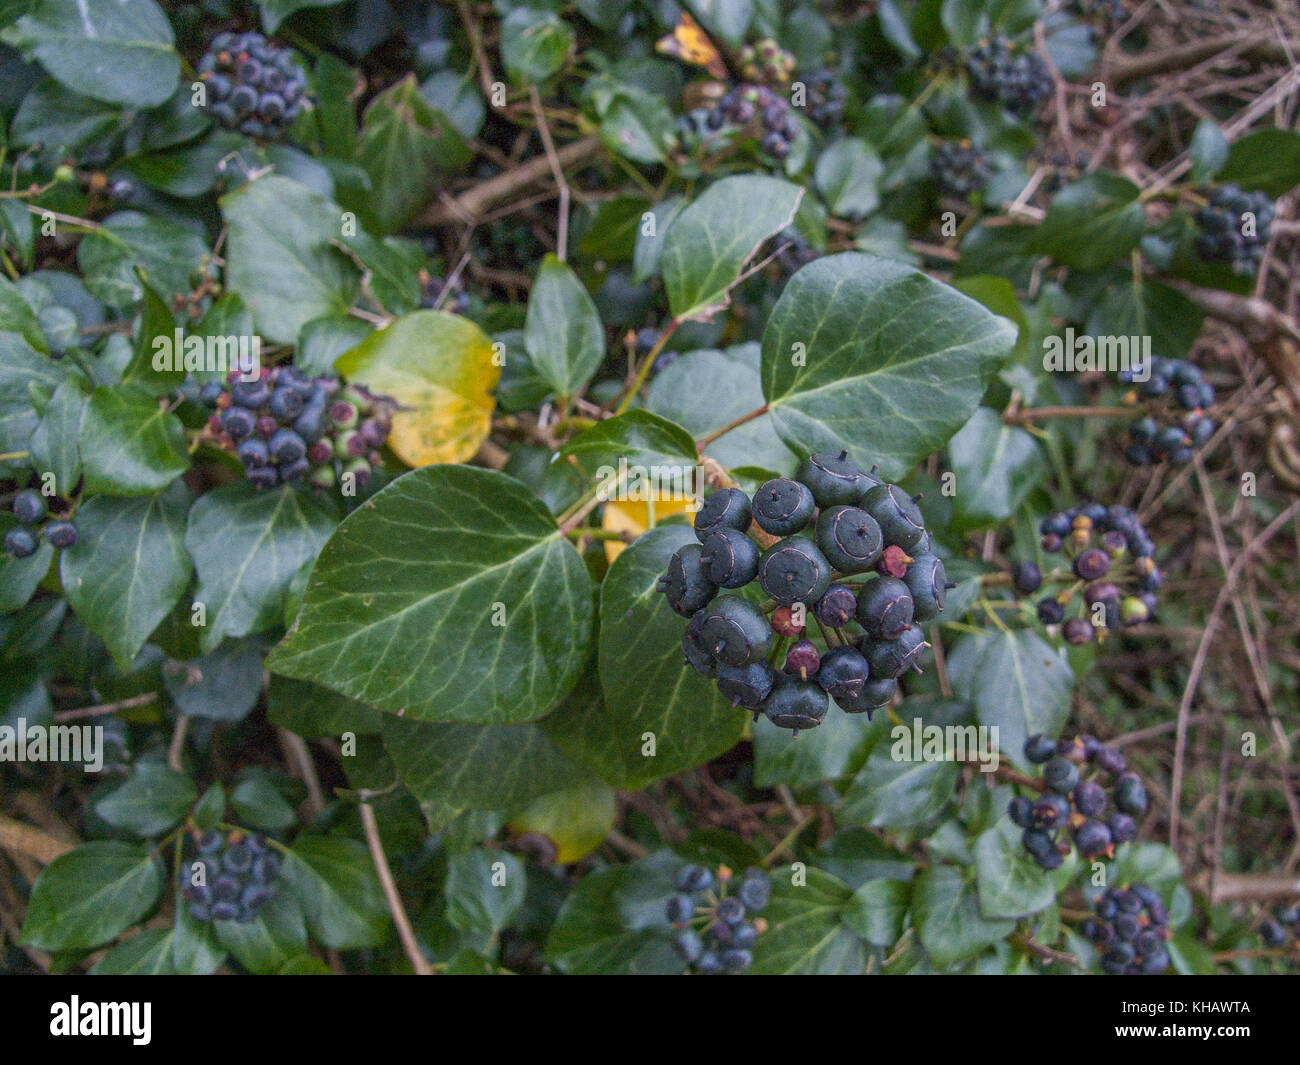 Close-up image of purple-black berries of Common Ivy / Hedera helix. Stock Photo